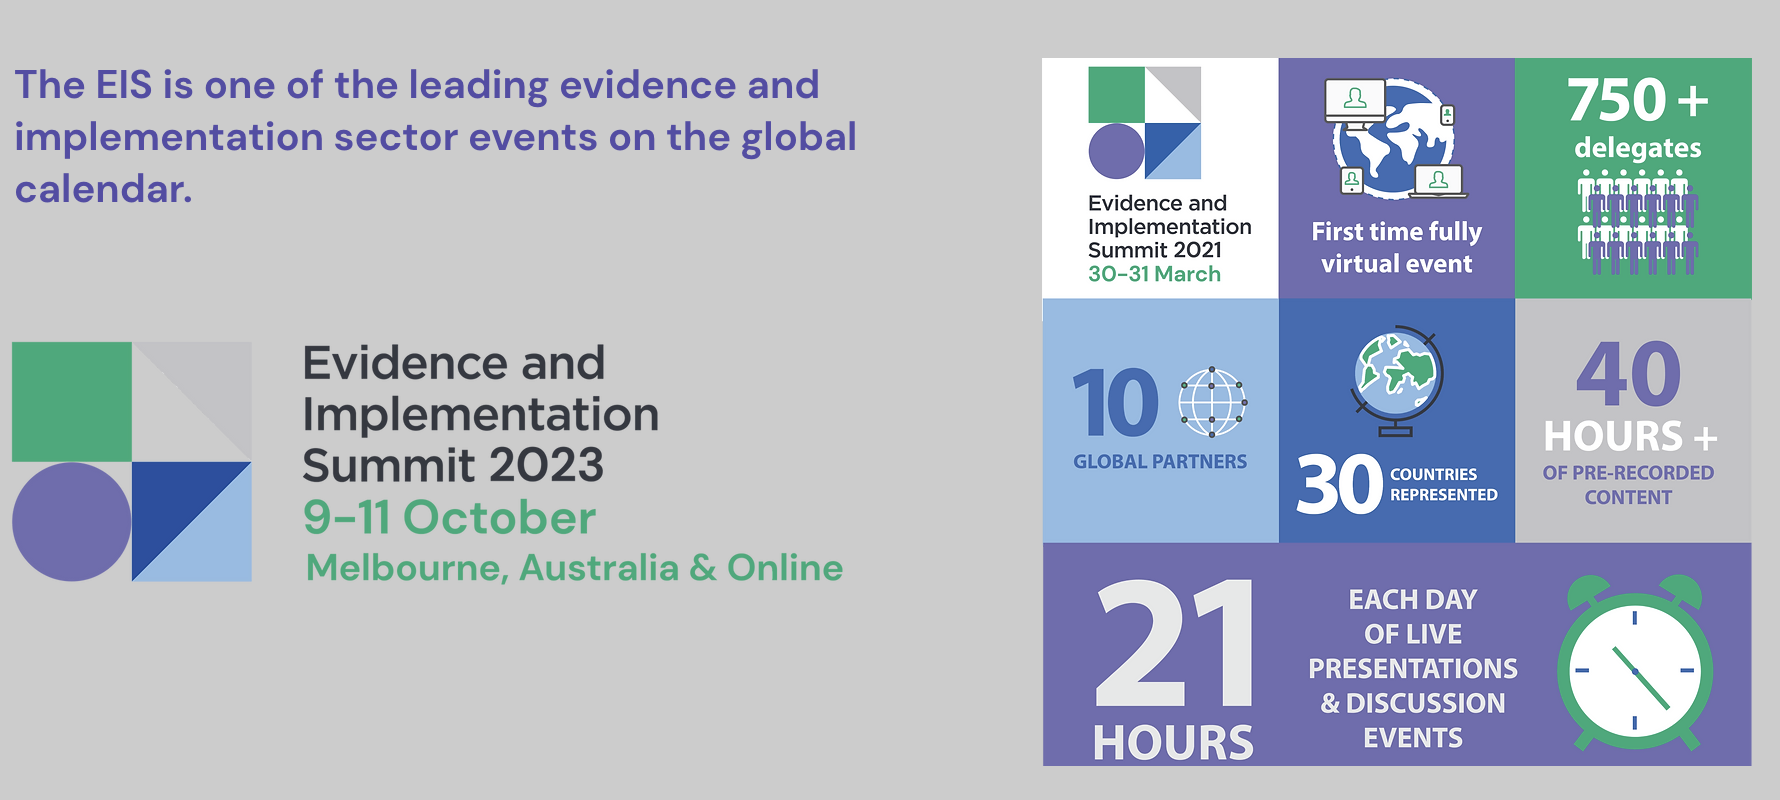 Evidence and Implementation Summit 2023 event banner